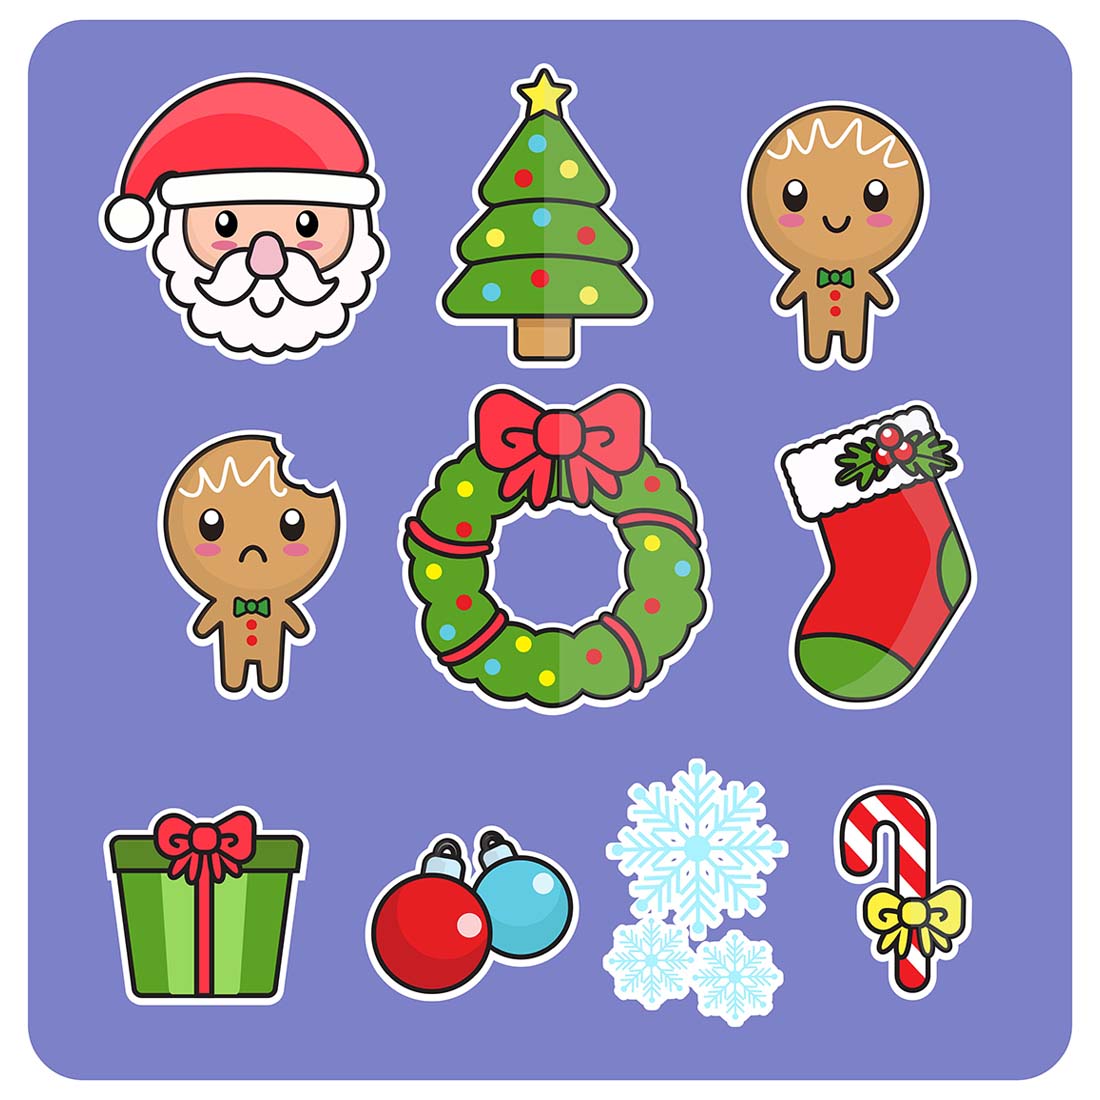 Illustration vector graphic of 10 cute Christmas sticker designs.